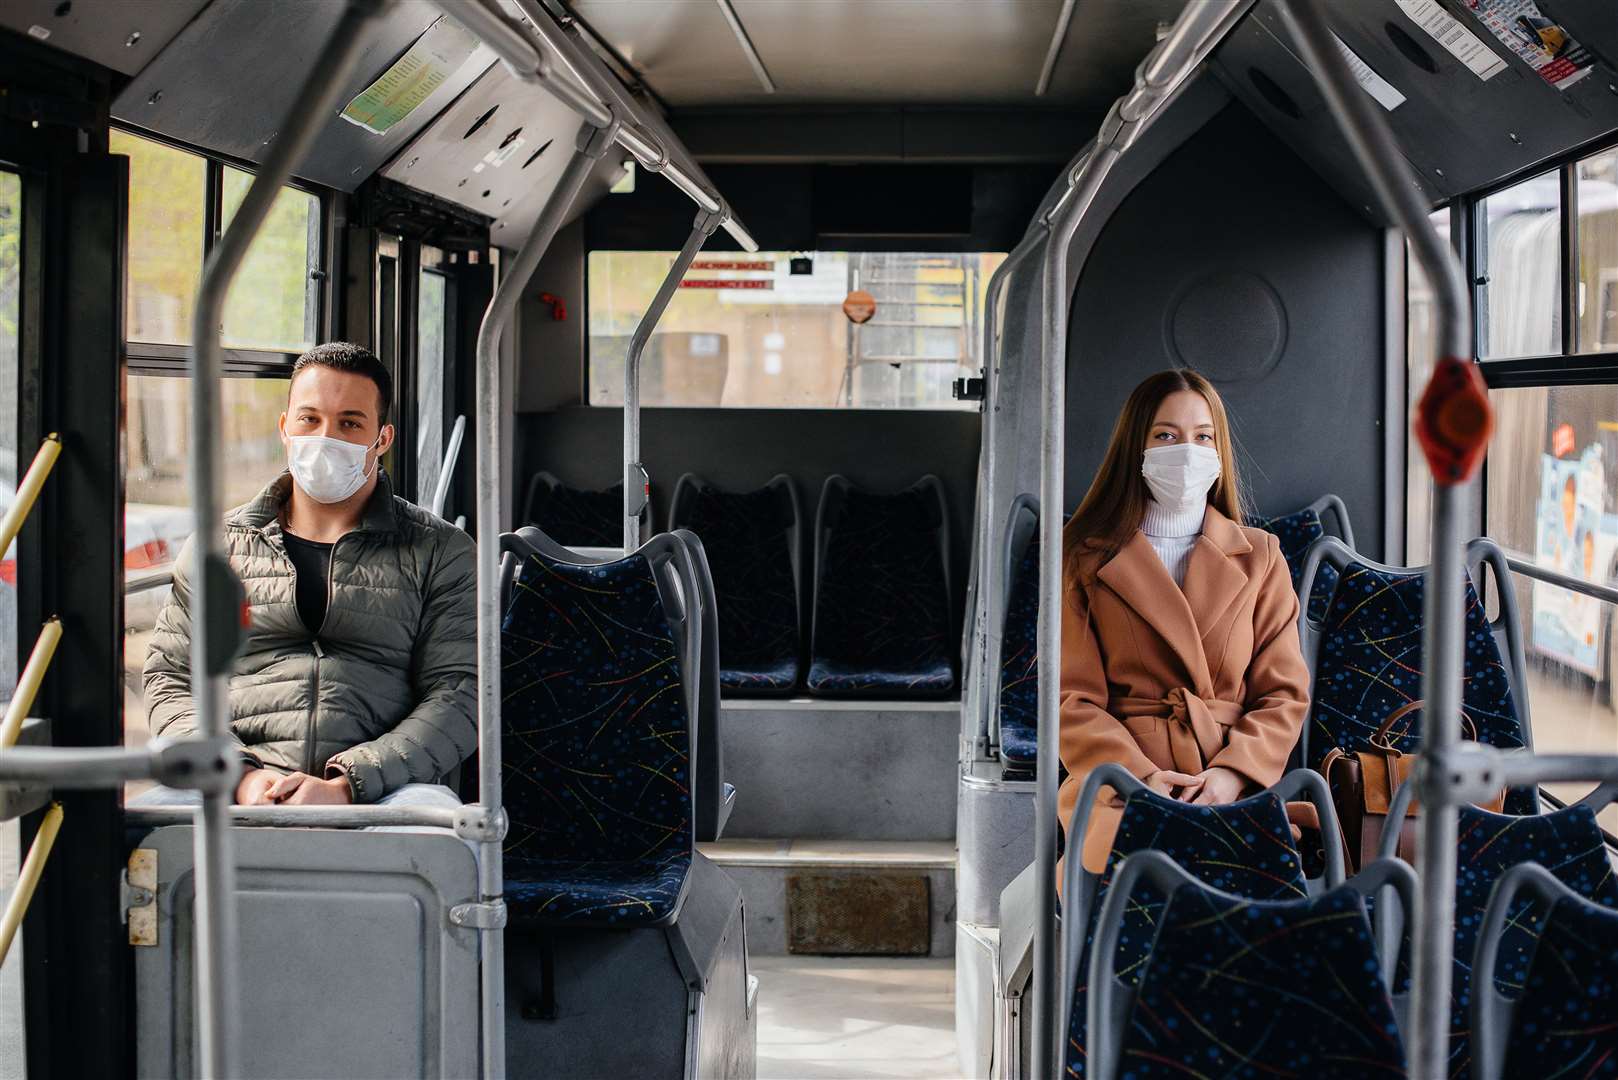 Passengers on public transport during the coronavirus pandemic keep their distance from each other. Protection and prevention covid 19.